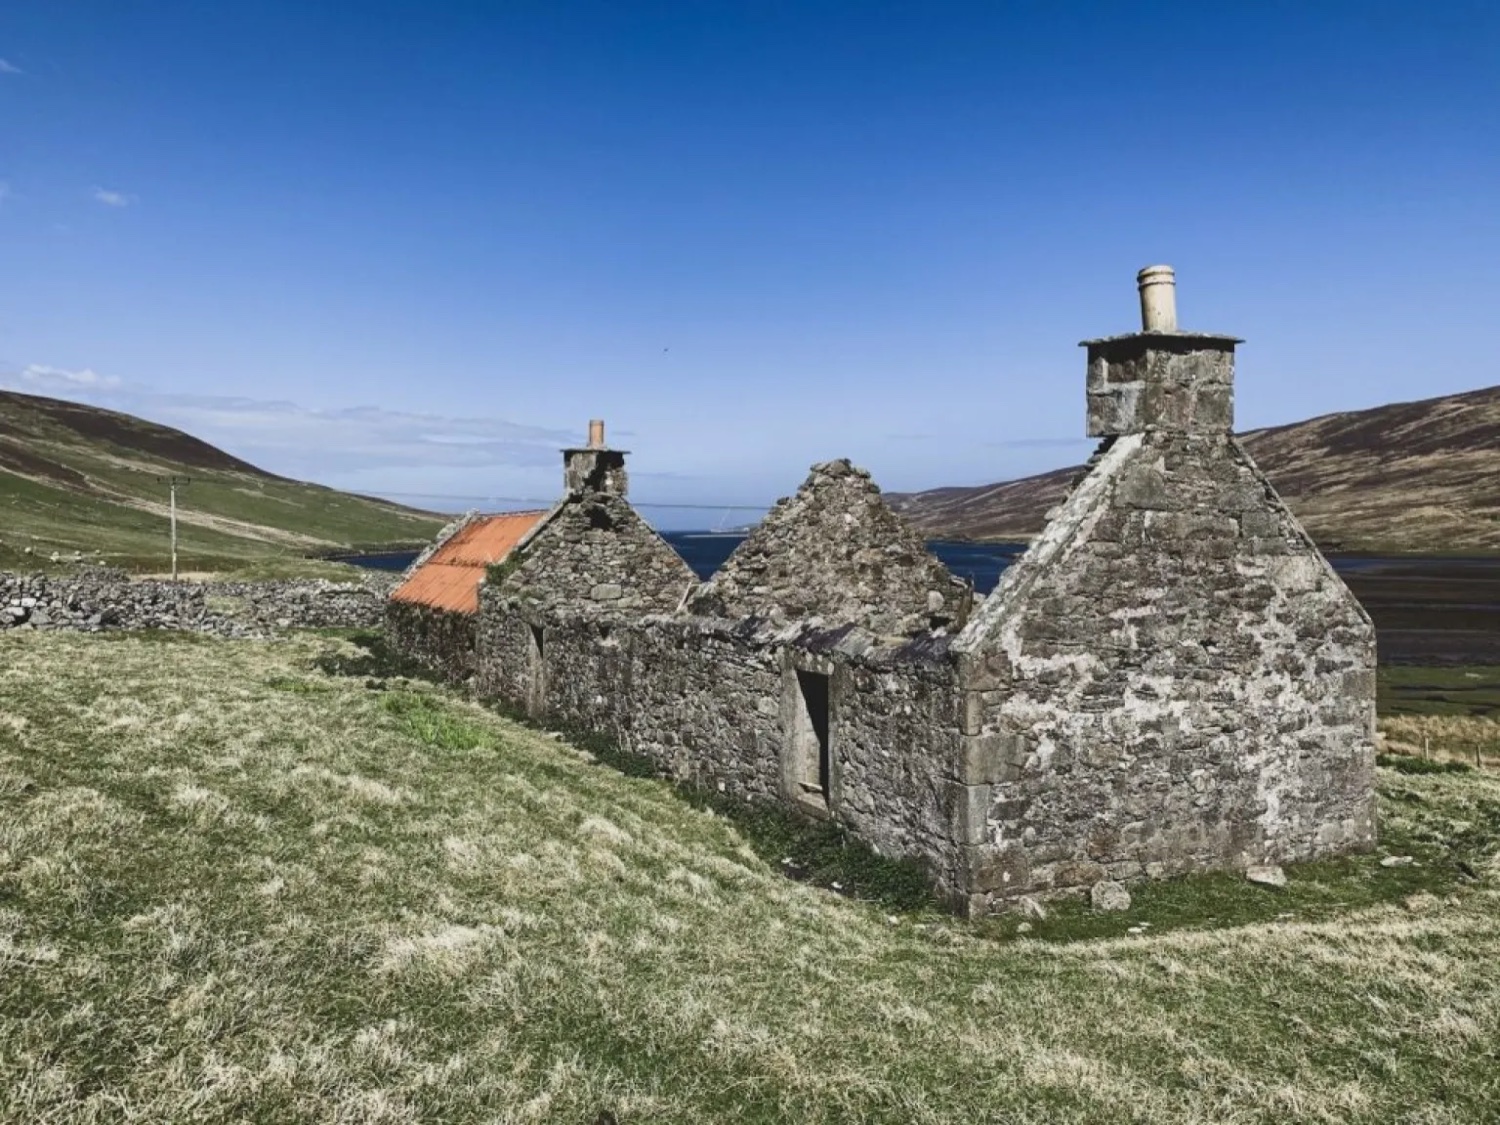 Image of an old croft house found on a travel trip to the Shetland Islands